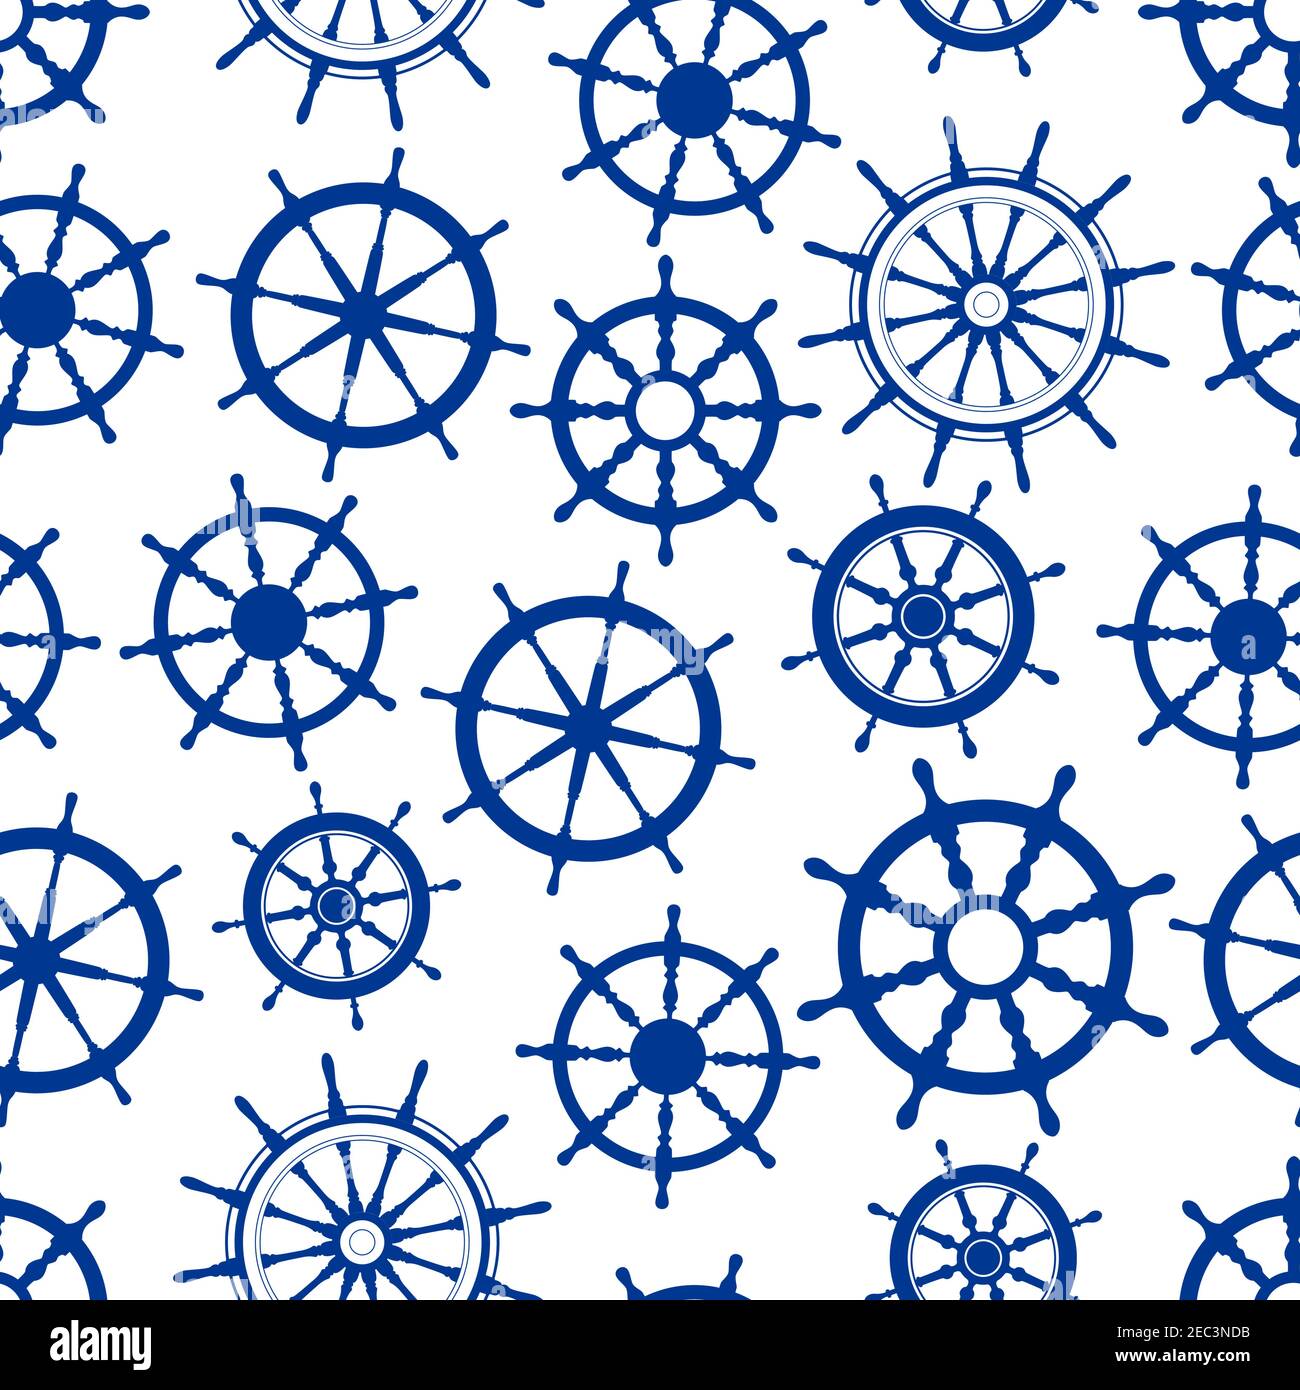 Retro marine helms background for nautical theme or scrapbook page